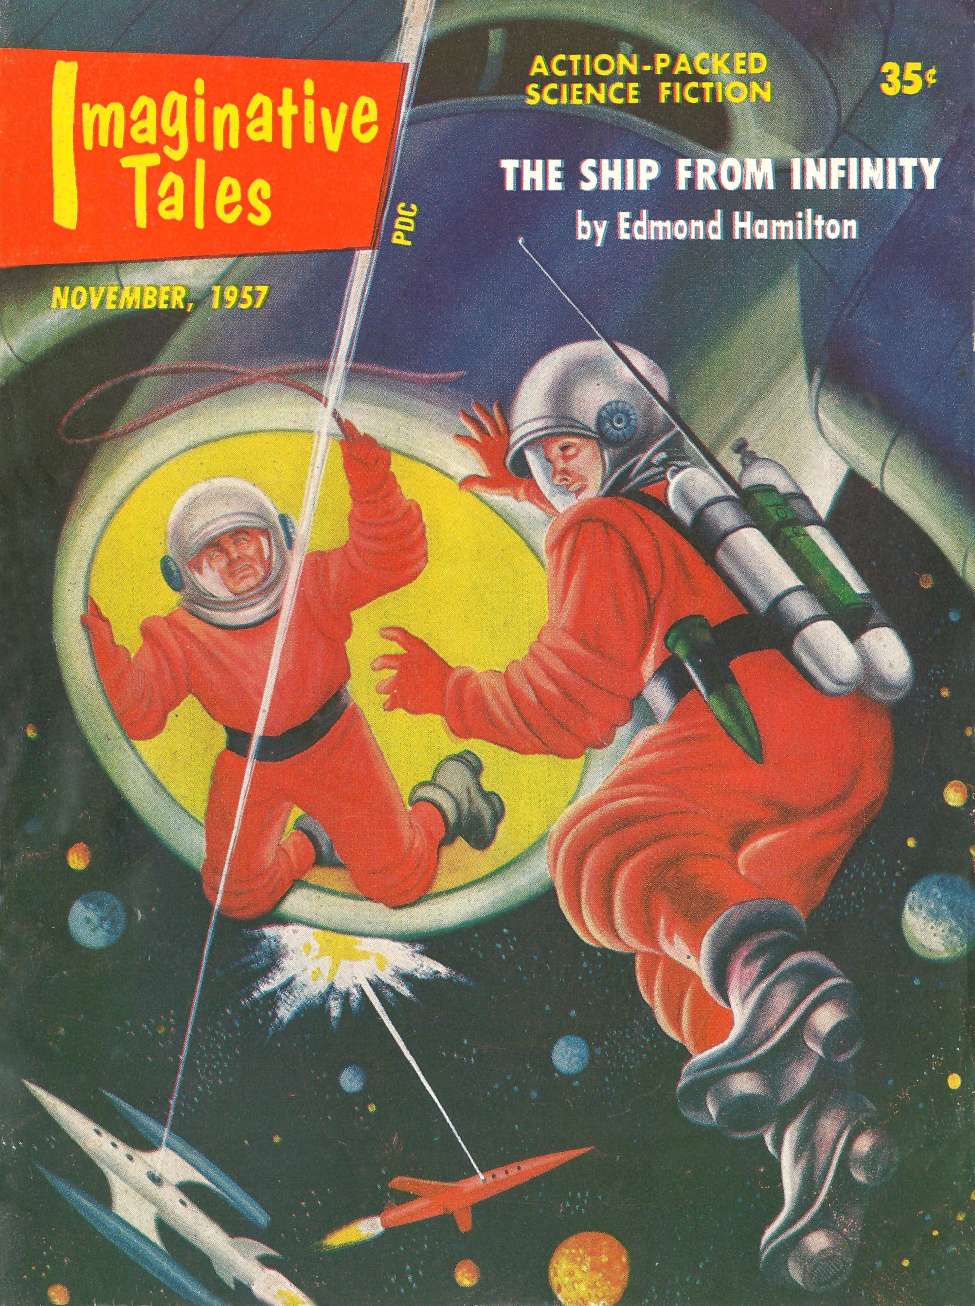 Book Cover For Imaginative Tales v4 6 - The Ship from Infinity - Edmond Hamilton